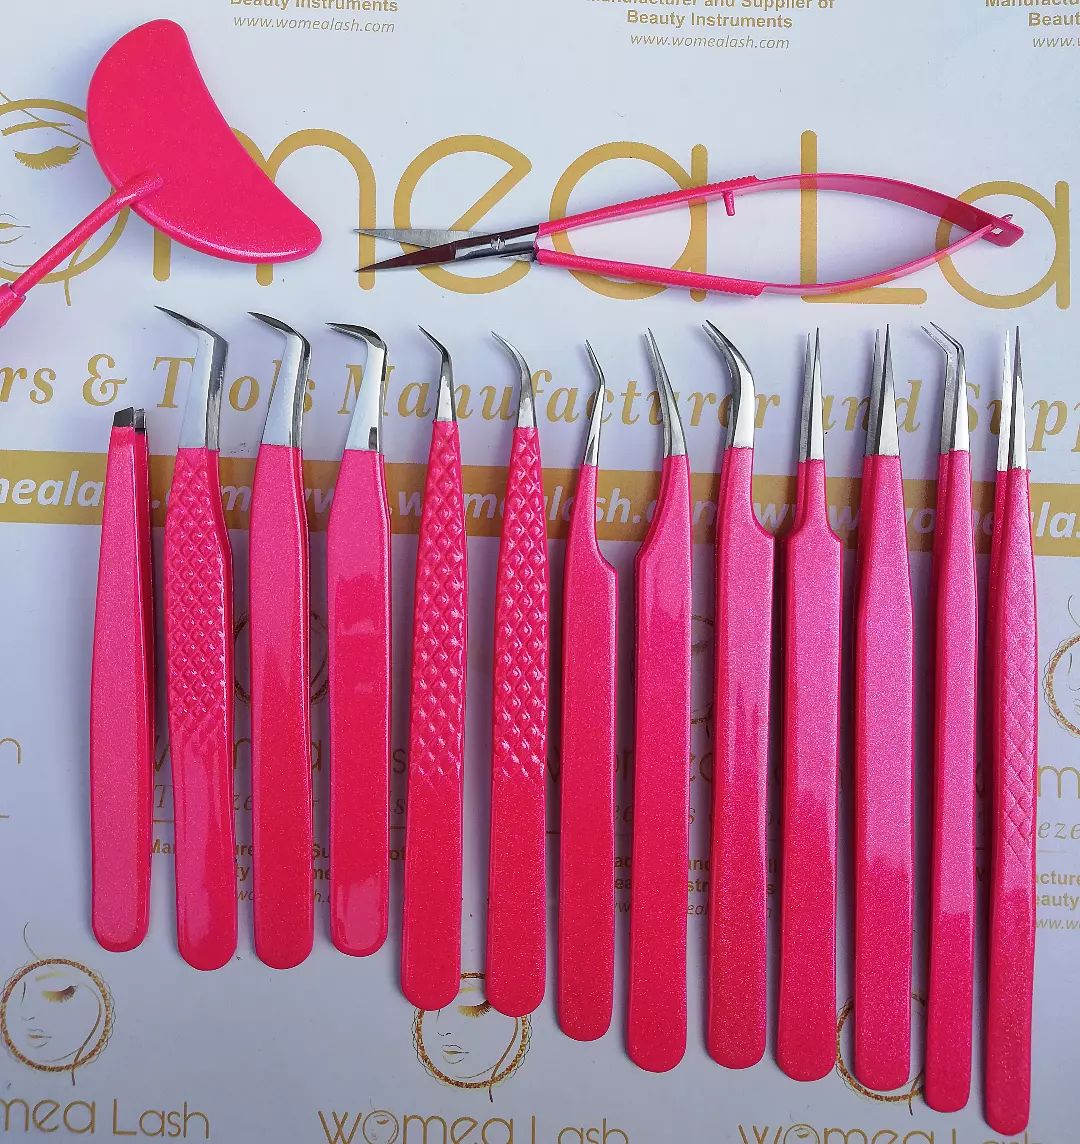 Custom Selling Eyelashes Extension Tweezers in Pink Powder Coated Colors Now on SALE